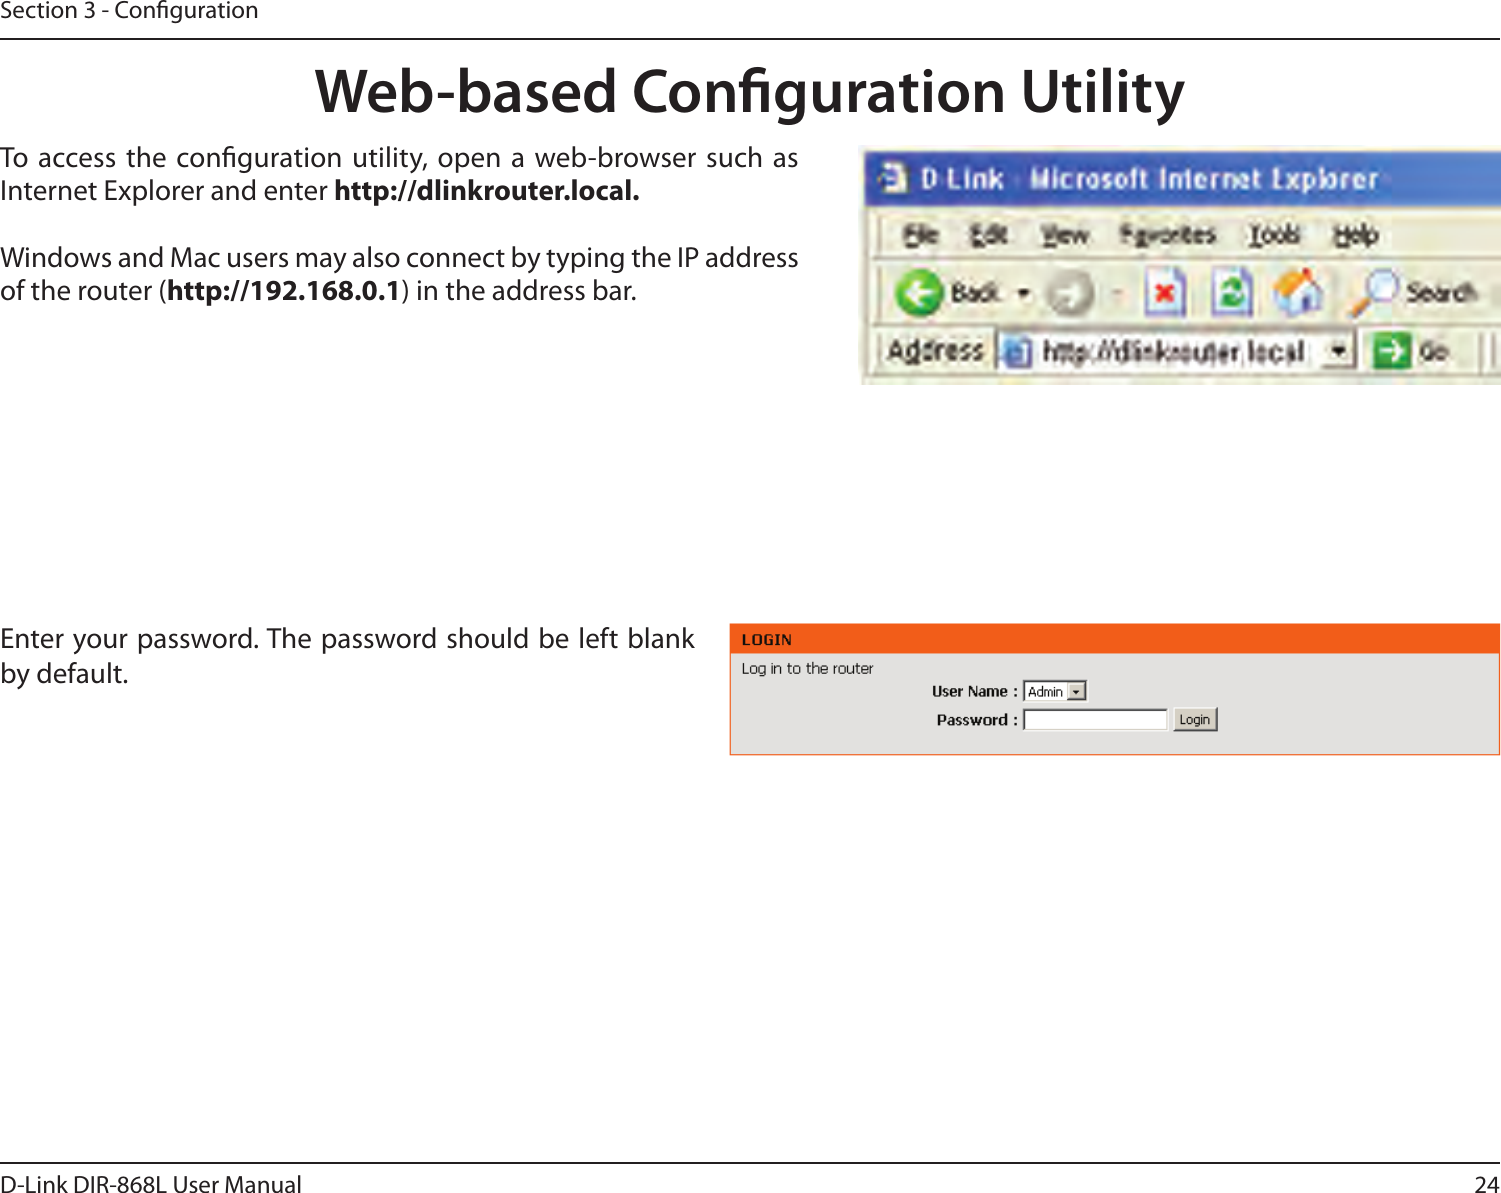 24D-Link DIR-868L User ManualSection 3 - CongurationWeb-based Conguration UtilityEnter your password. The password should be left blank by default.To  access the conguration utility, open a web-browser such as Internet Explorer and enter http://dlinkrouter.local. Windows and Mac users may also connect by typing the IP address of the router (http://192.168.0.1) in the address bar.